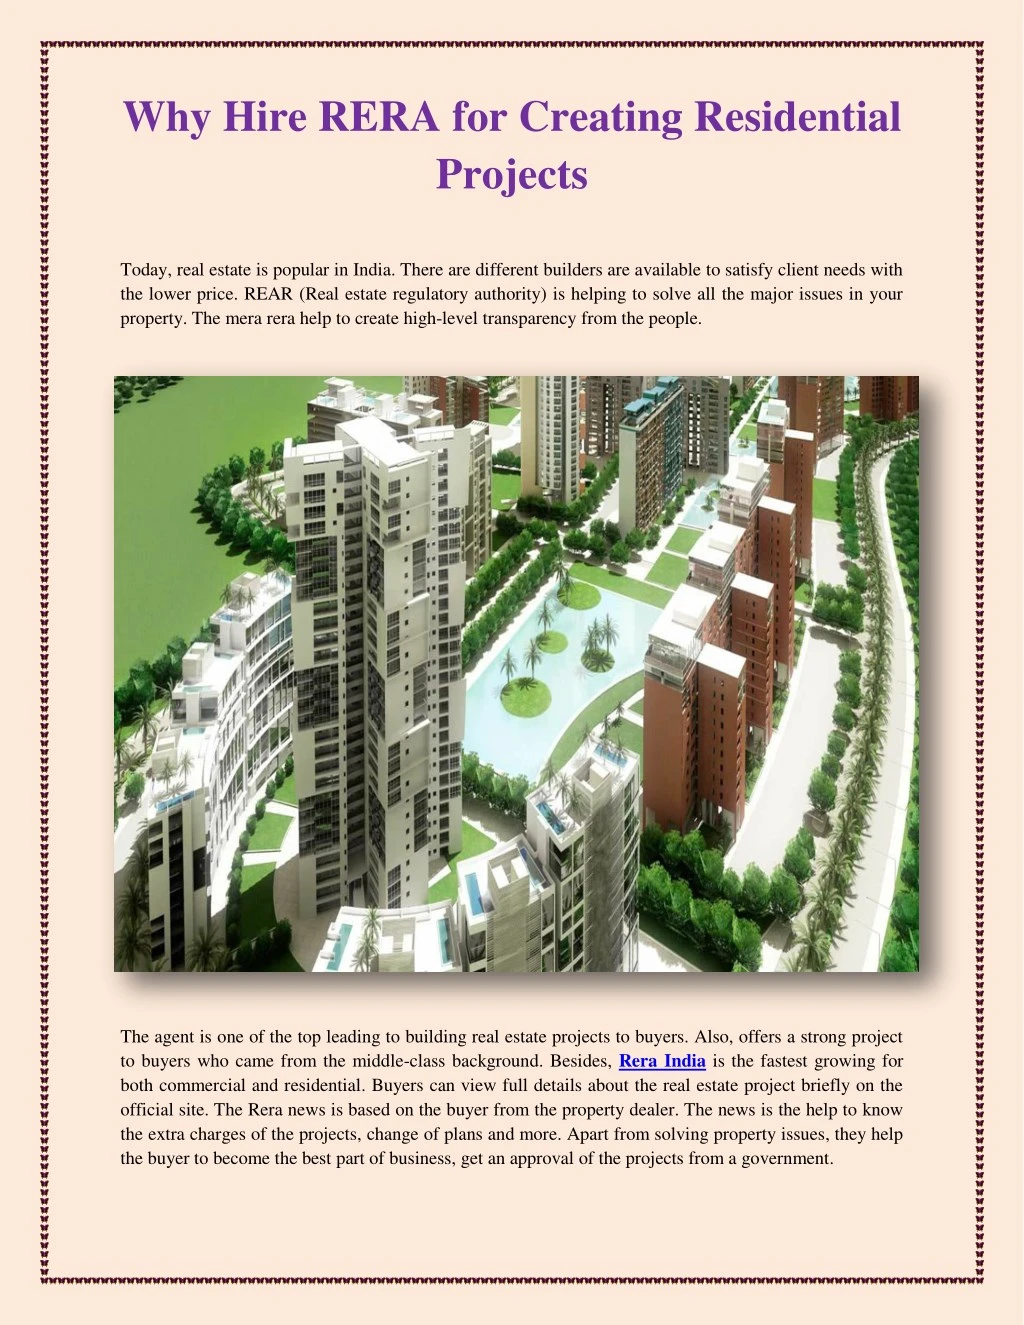 why hire rera for creating residential projects